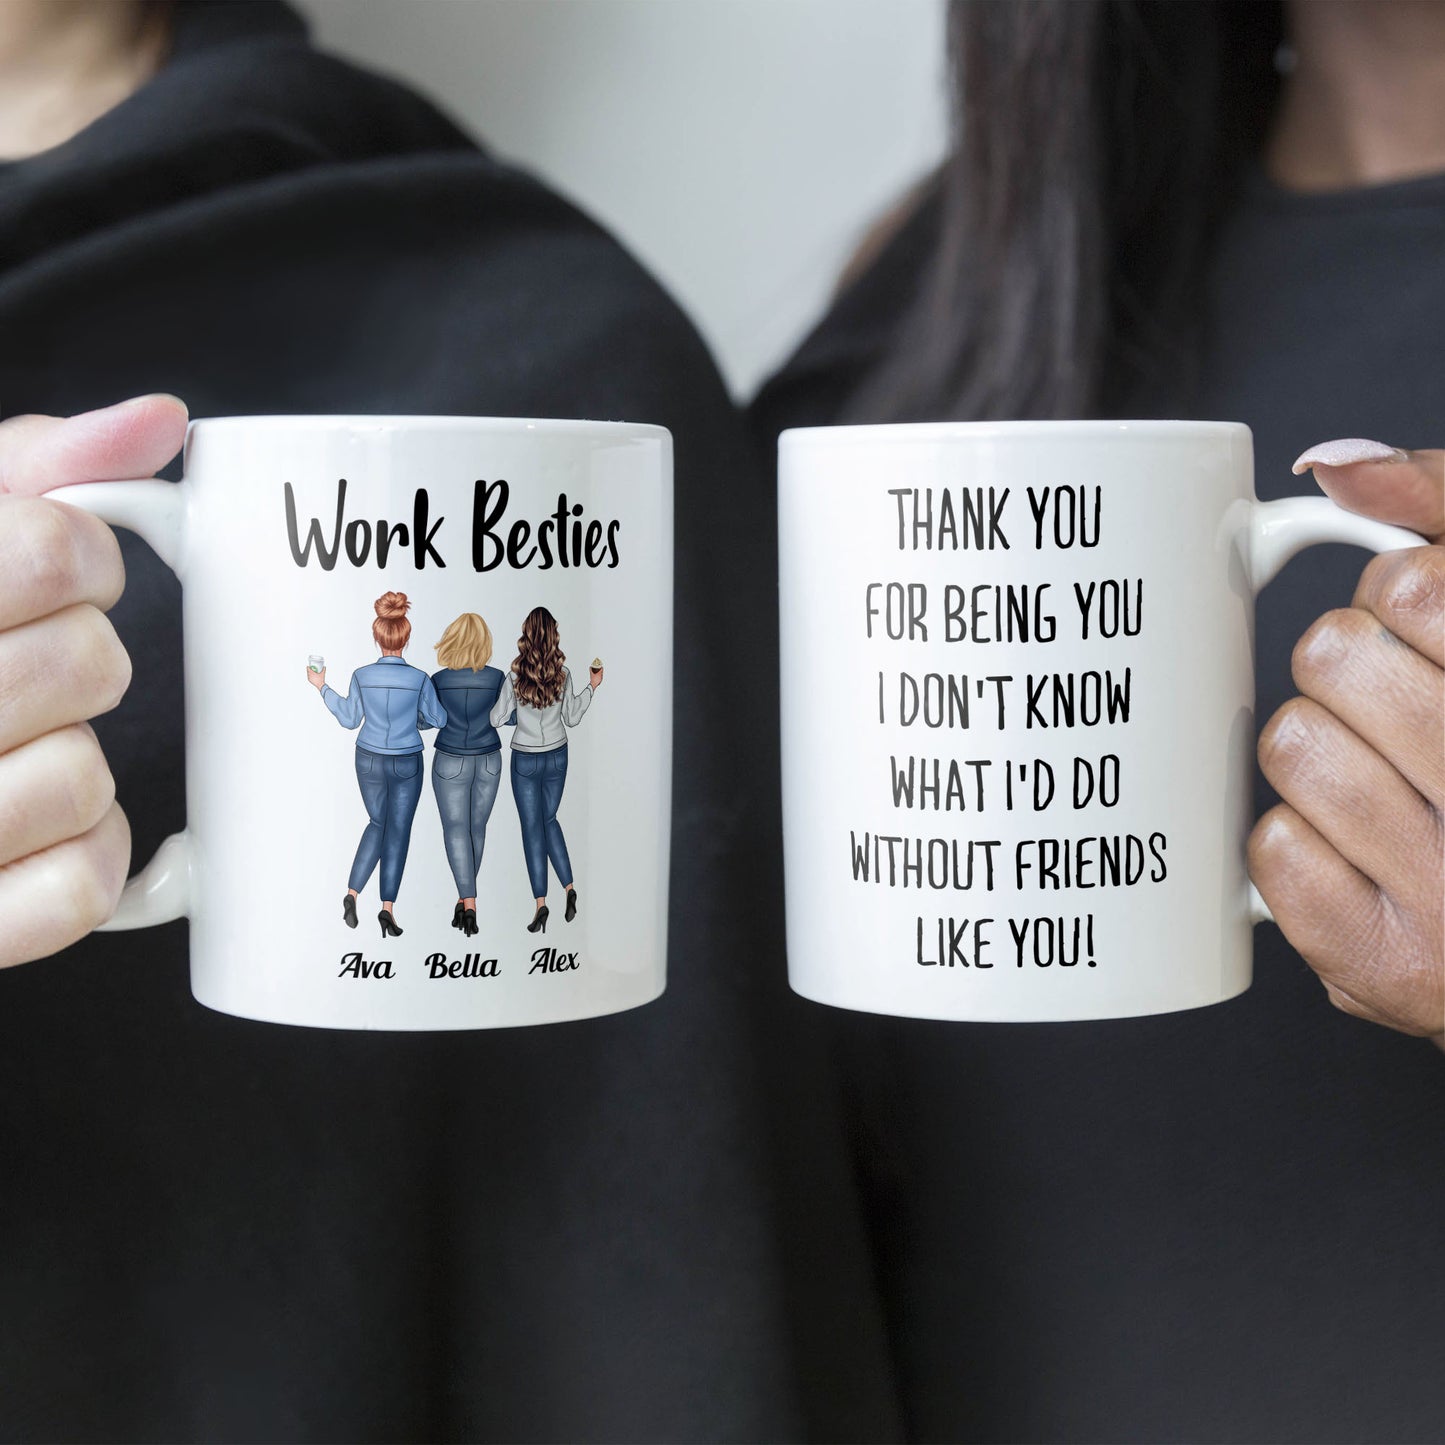 Work Bestie Thank You For Being You - Personalized Mug